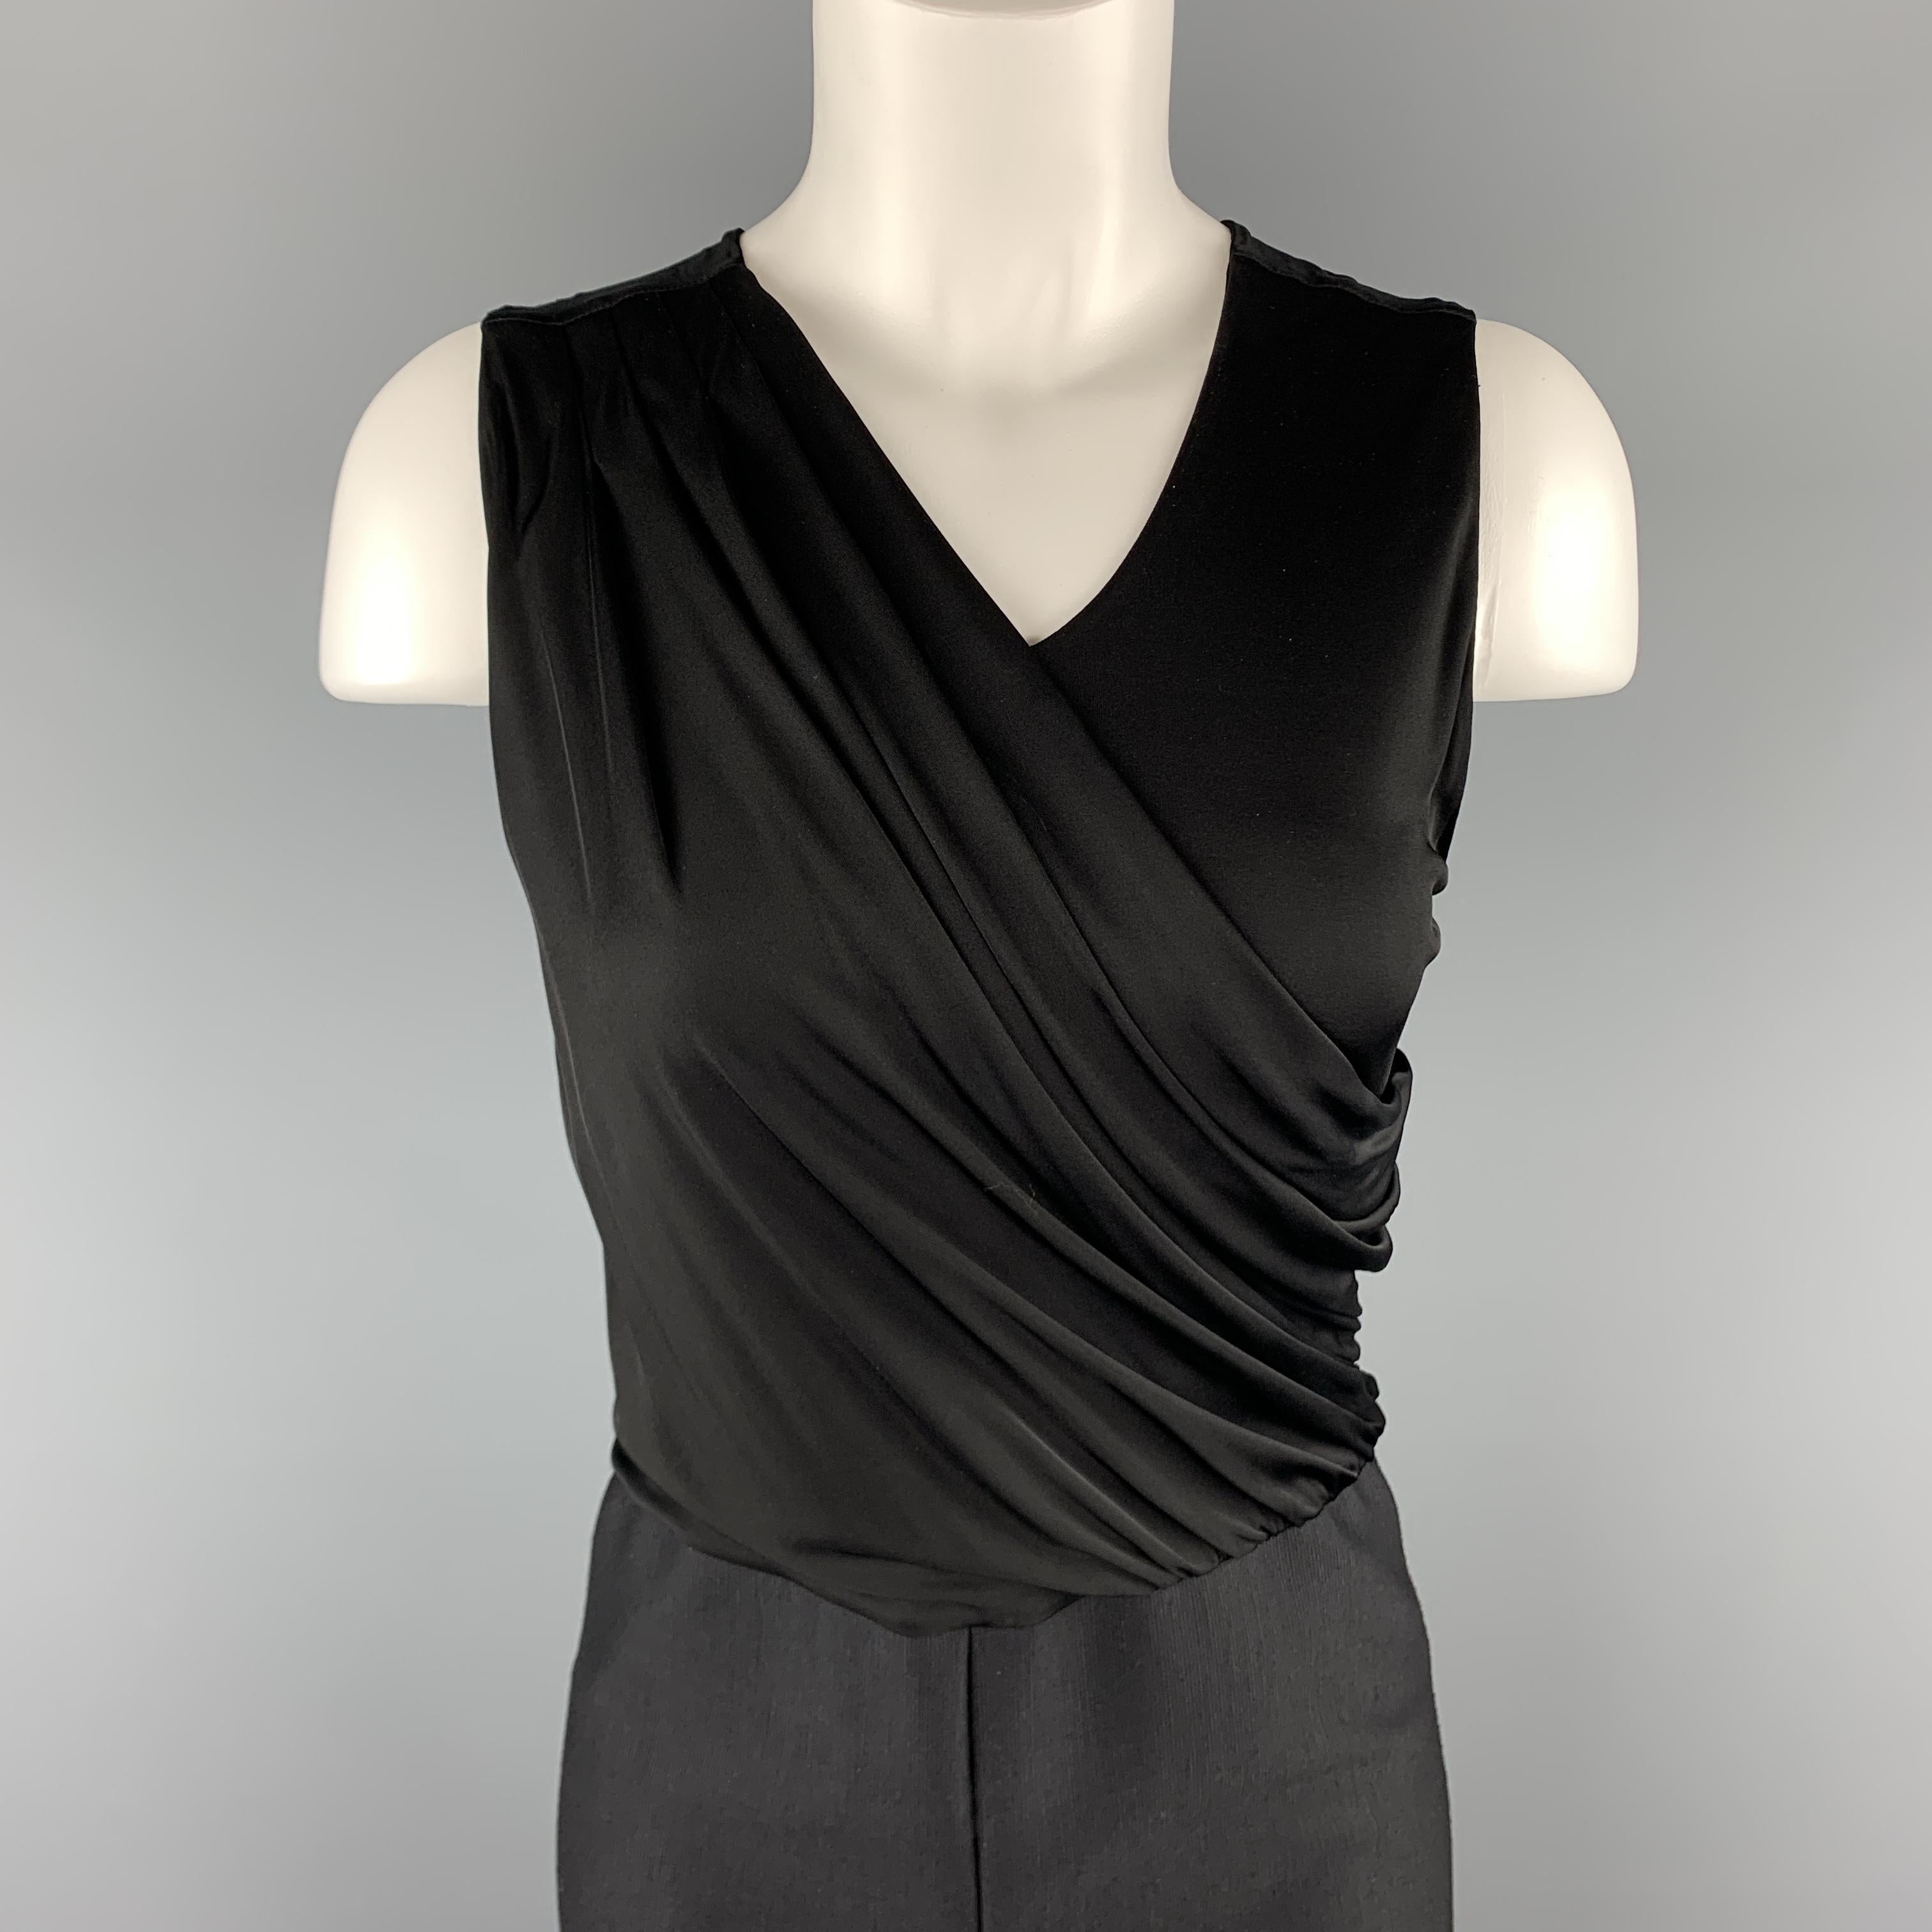 GIORGIO ARMANI jumpsuit features a sleeveless V neck top with an asymmetrical drape and wide leg textured wool blend pant bottom with a thick tuxedo stripe. Made in Italy.

Excellent Pre-Owned Condition.
Marked: IT 44

Measurements:

Shoulder: 13.5